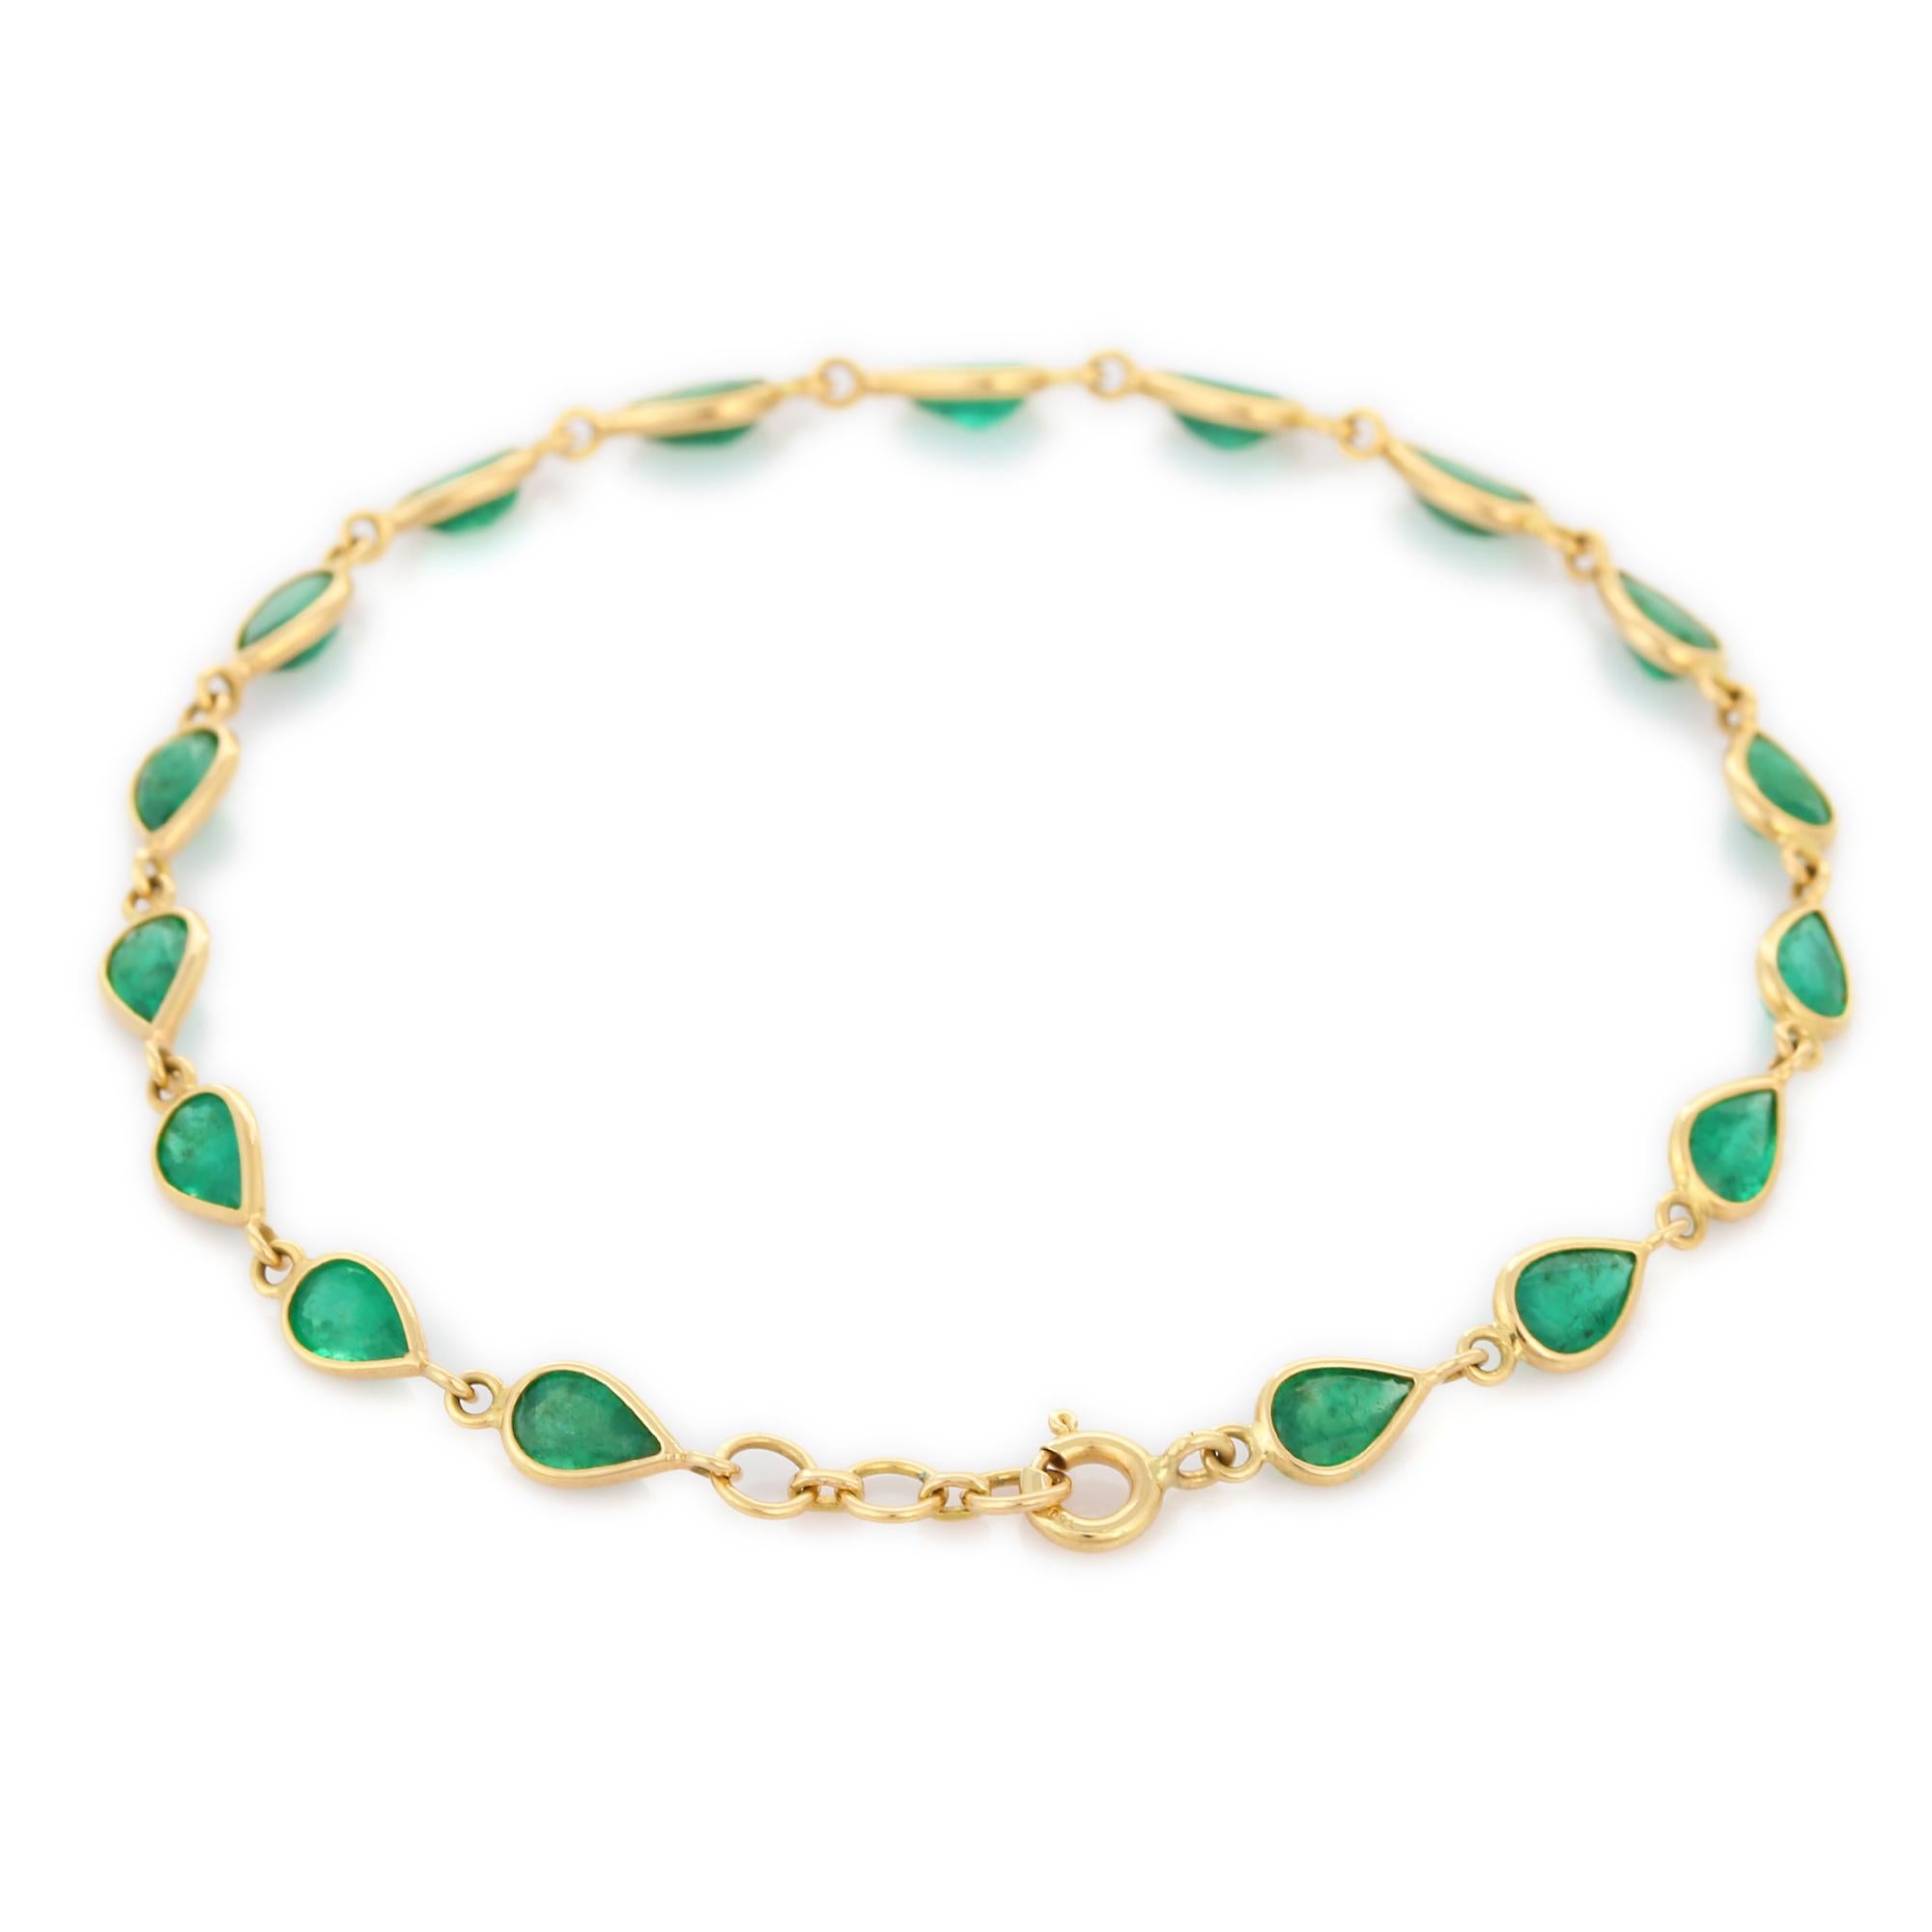 Women's Exquisite 5.75 ct Pear Cut Emerald Chain Bracelet Inlaid in 18K Yellow Gold For Sale